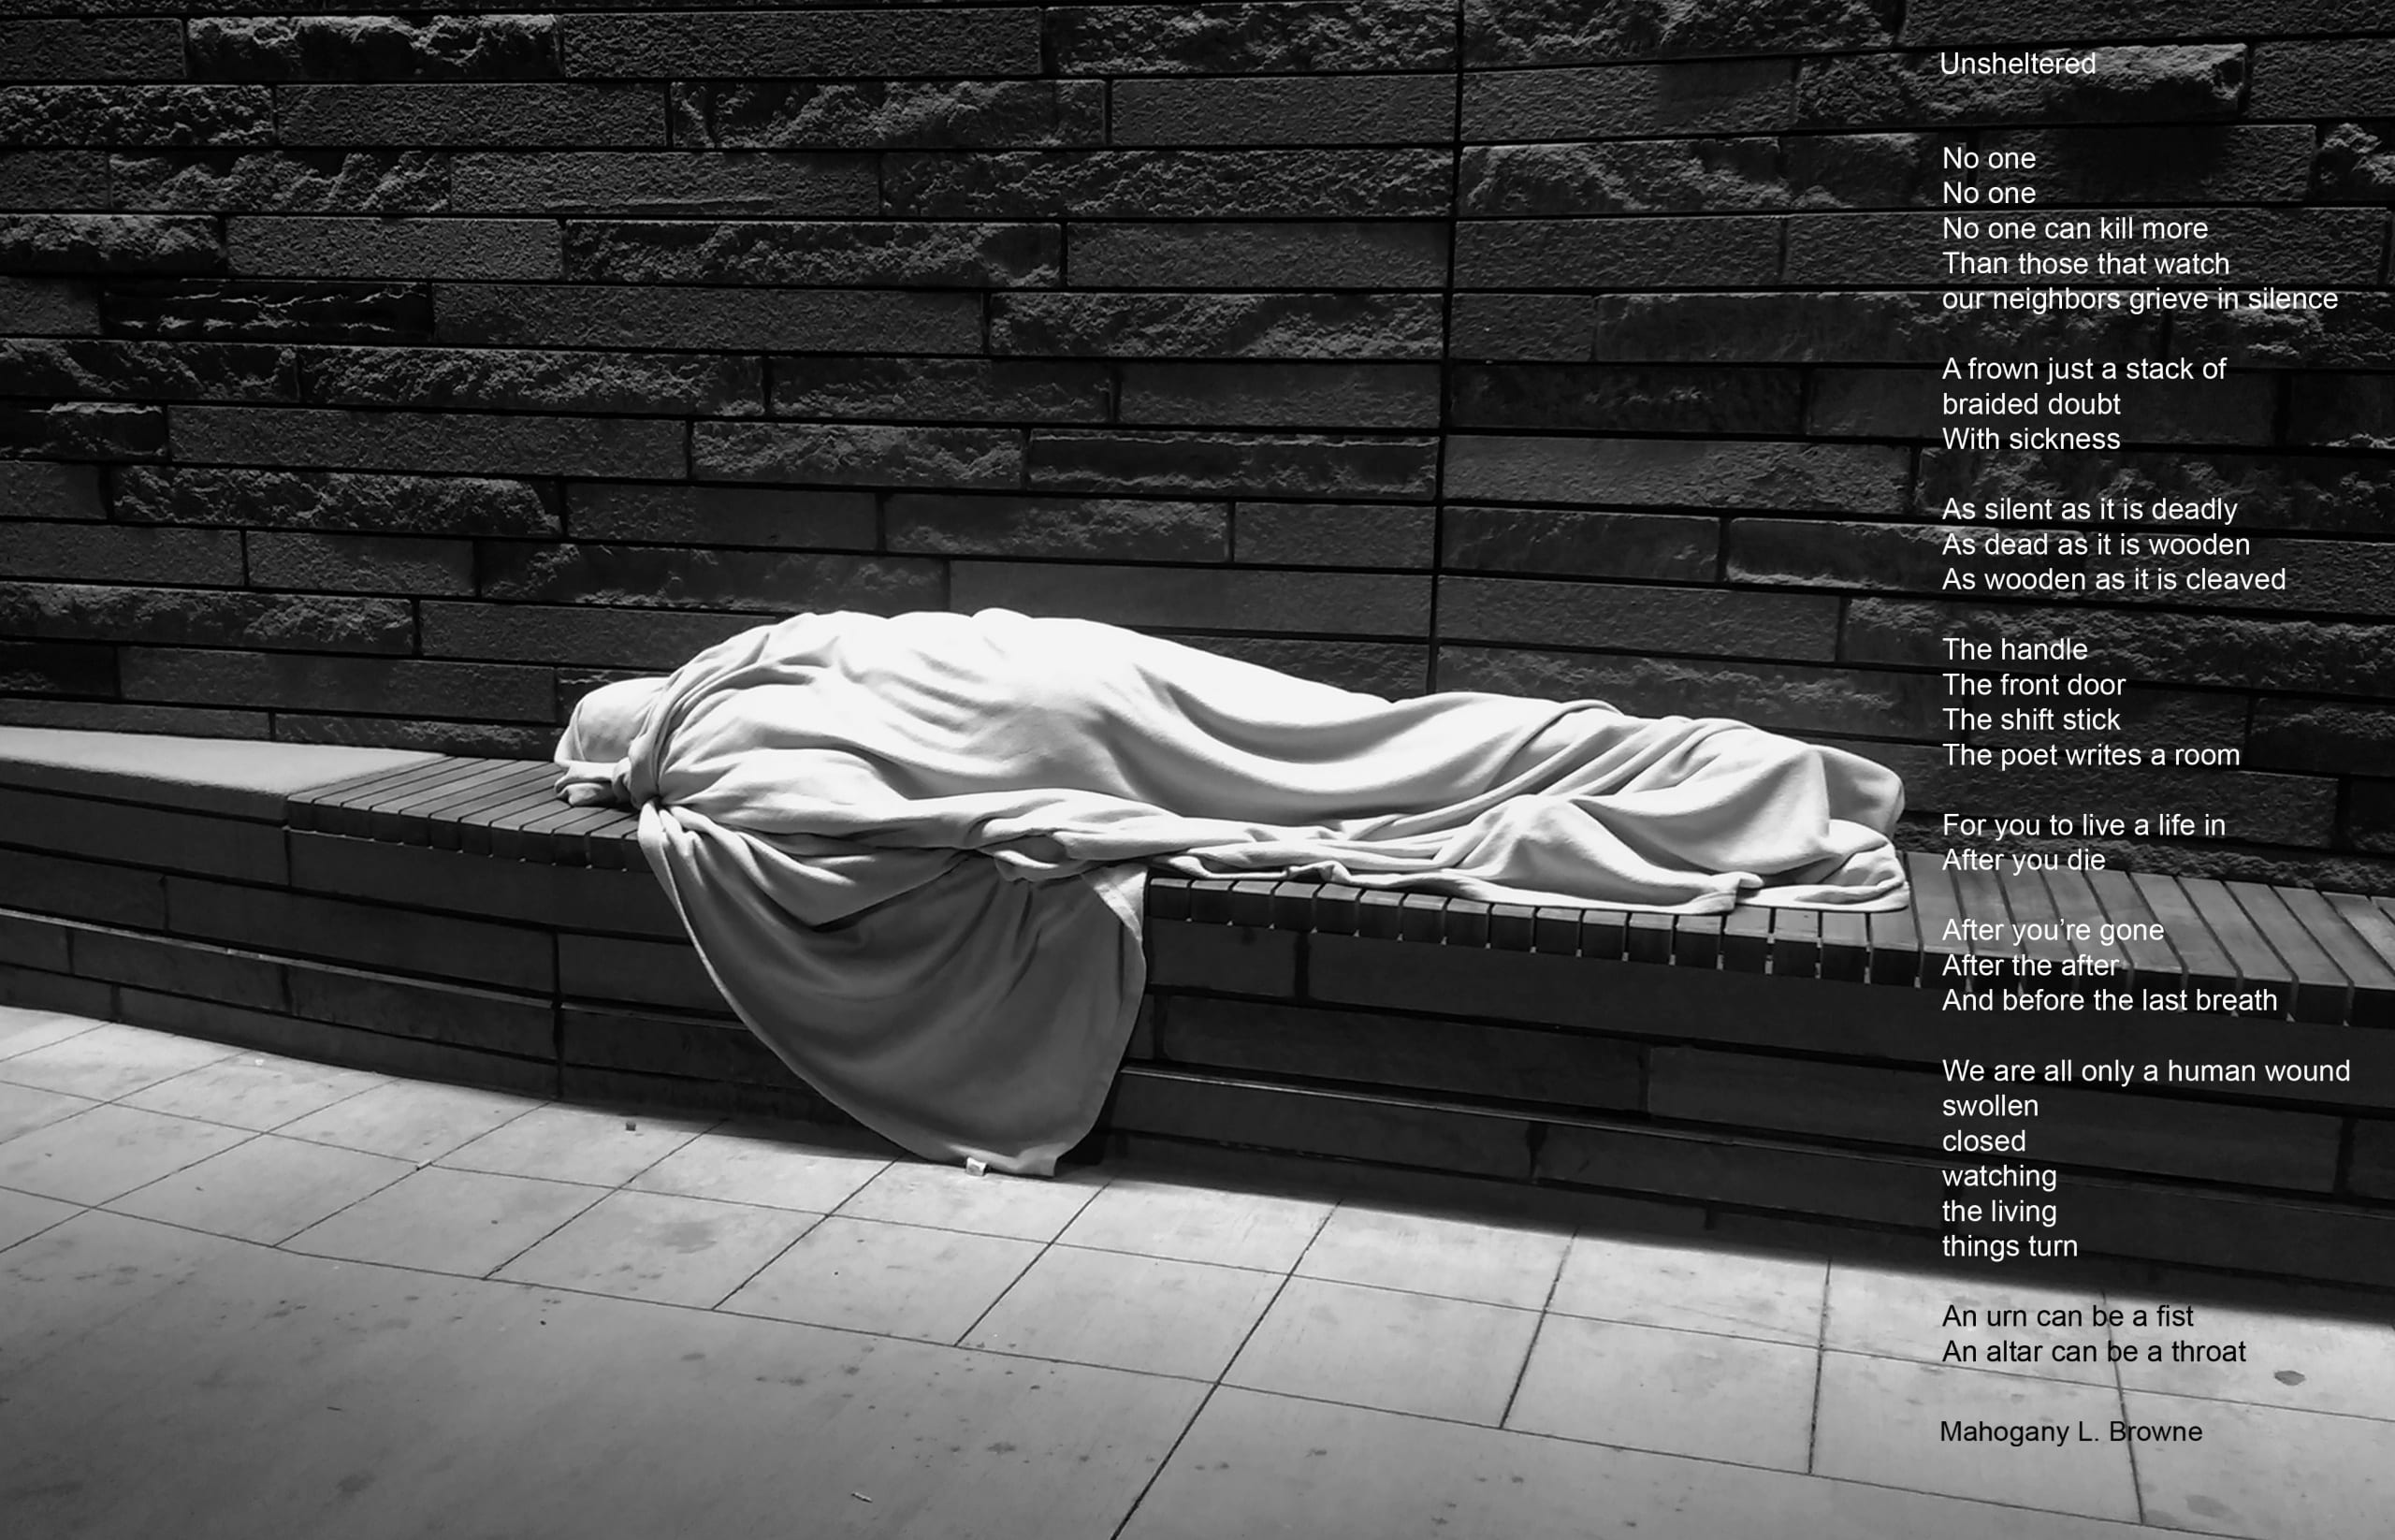 Black and white photo of figure wrapped in cloth from head to toe and laid horizontally on a low, wooden bench against a building’s exterior stone wall with a poem superimposed over the right side of the image